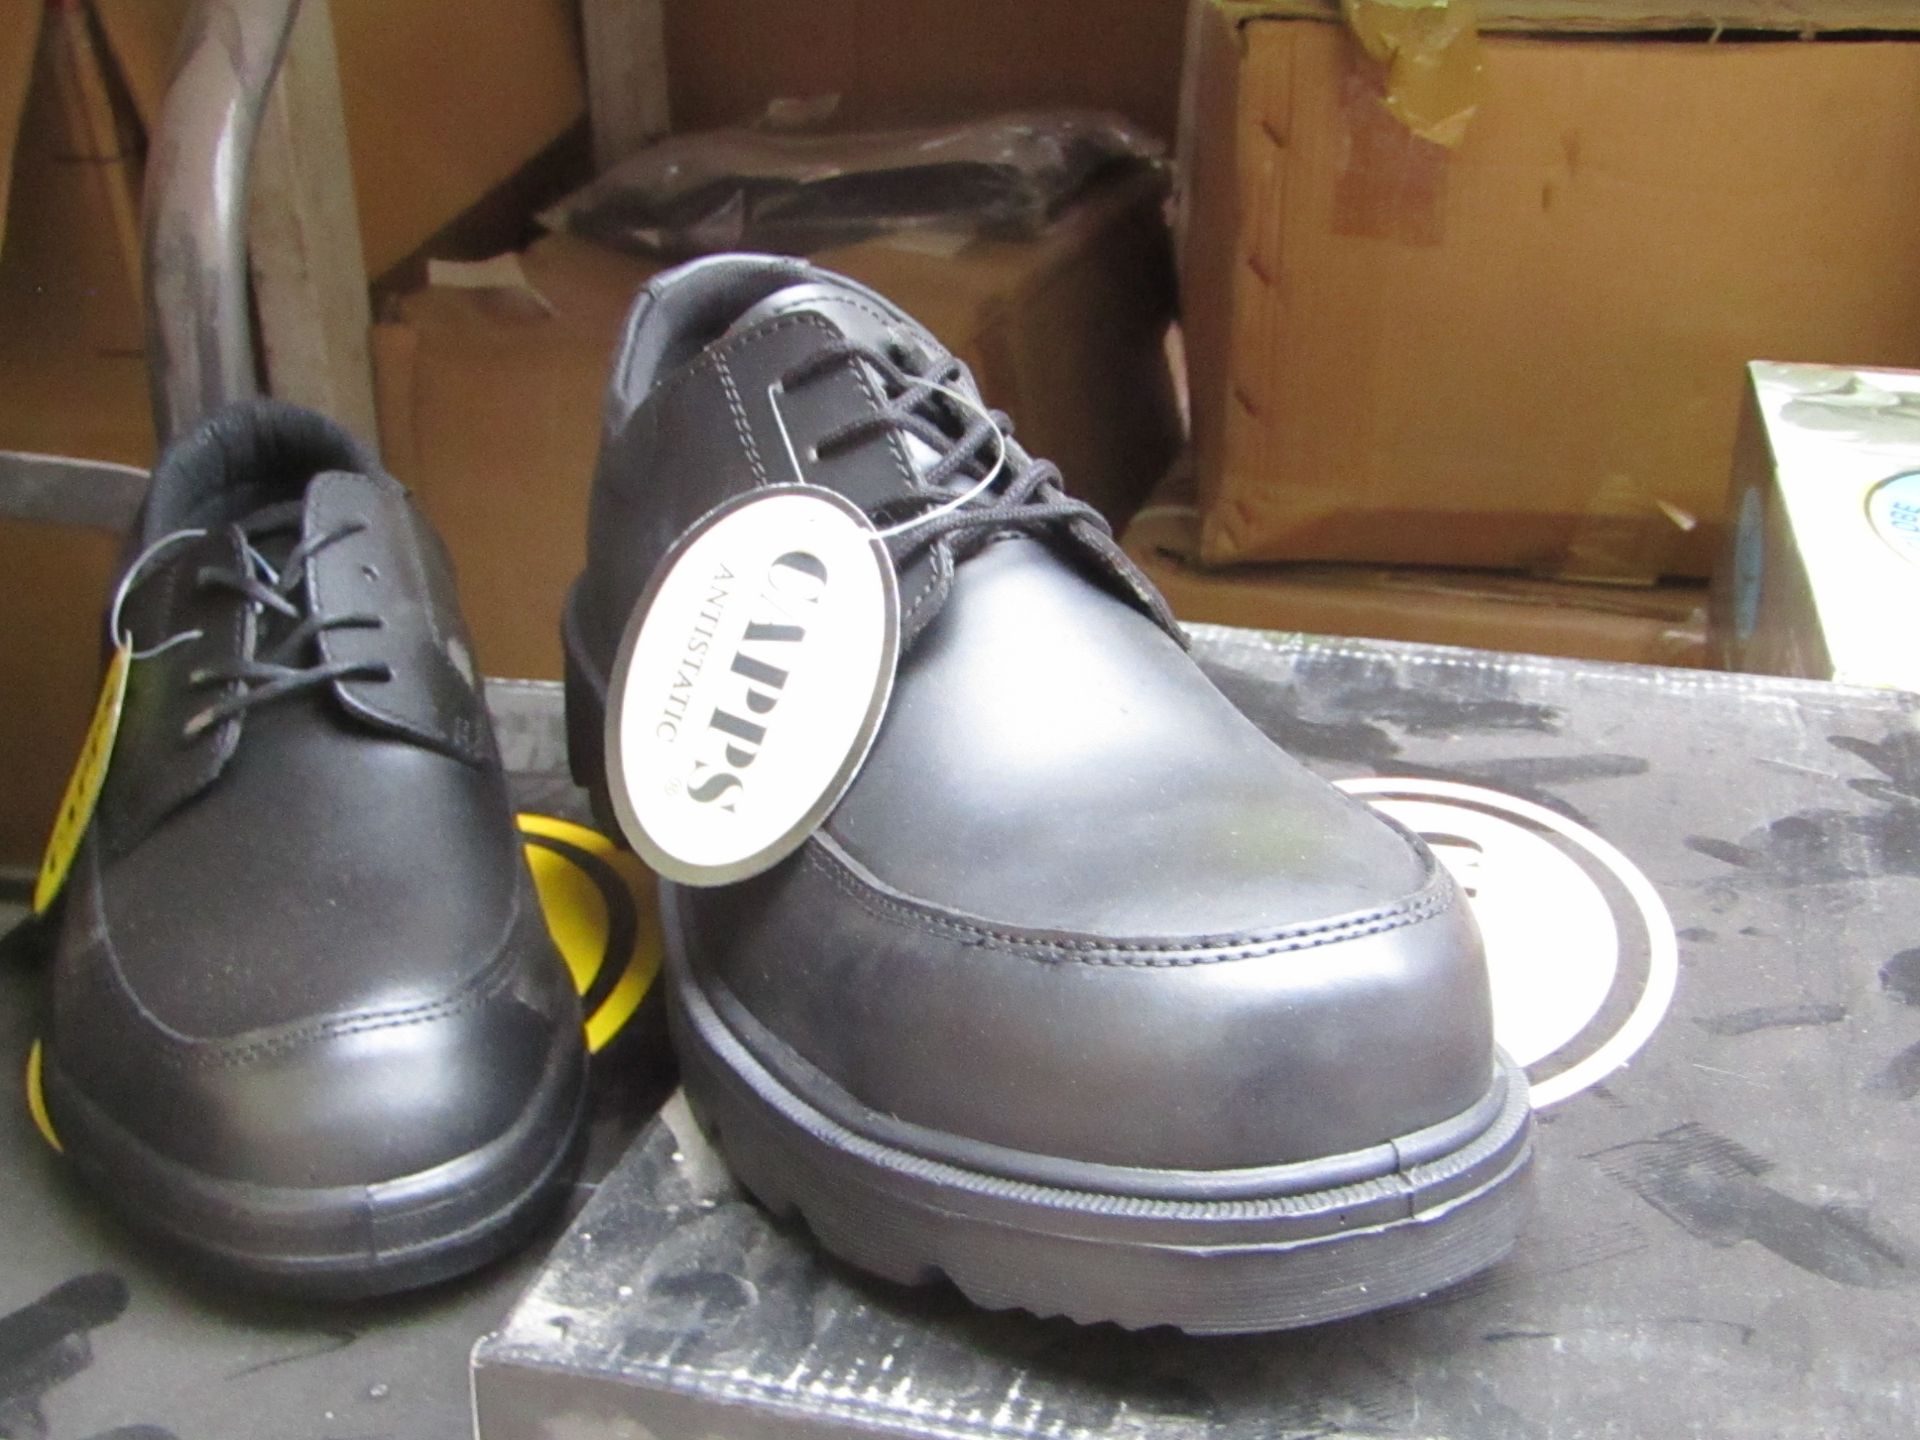 Capps Black Lace up steel toe cap mudguard Shoes, size 9, new and boxed.